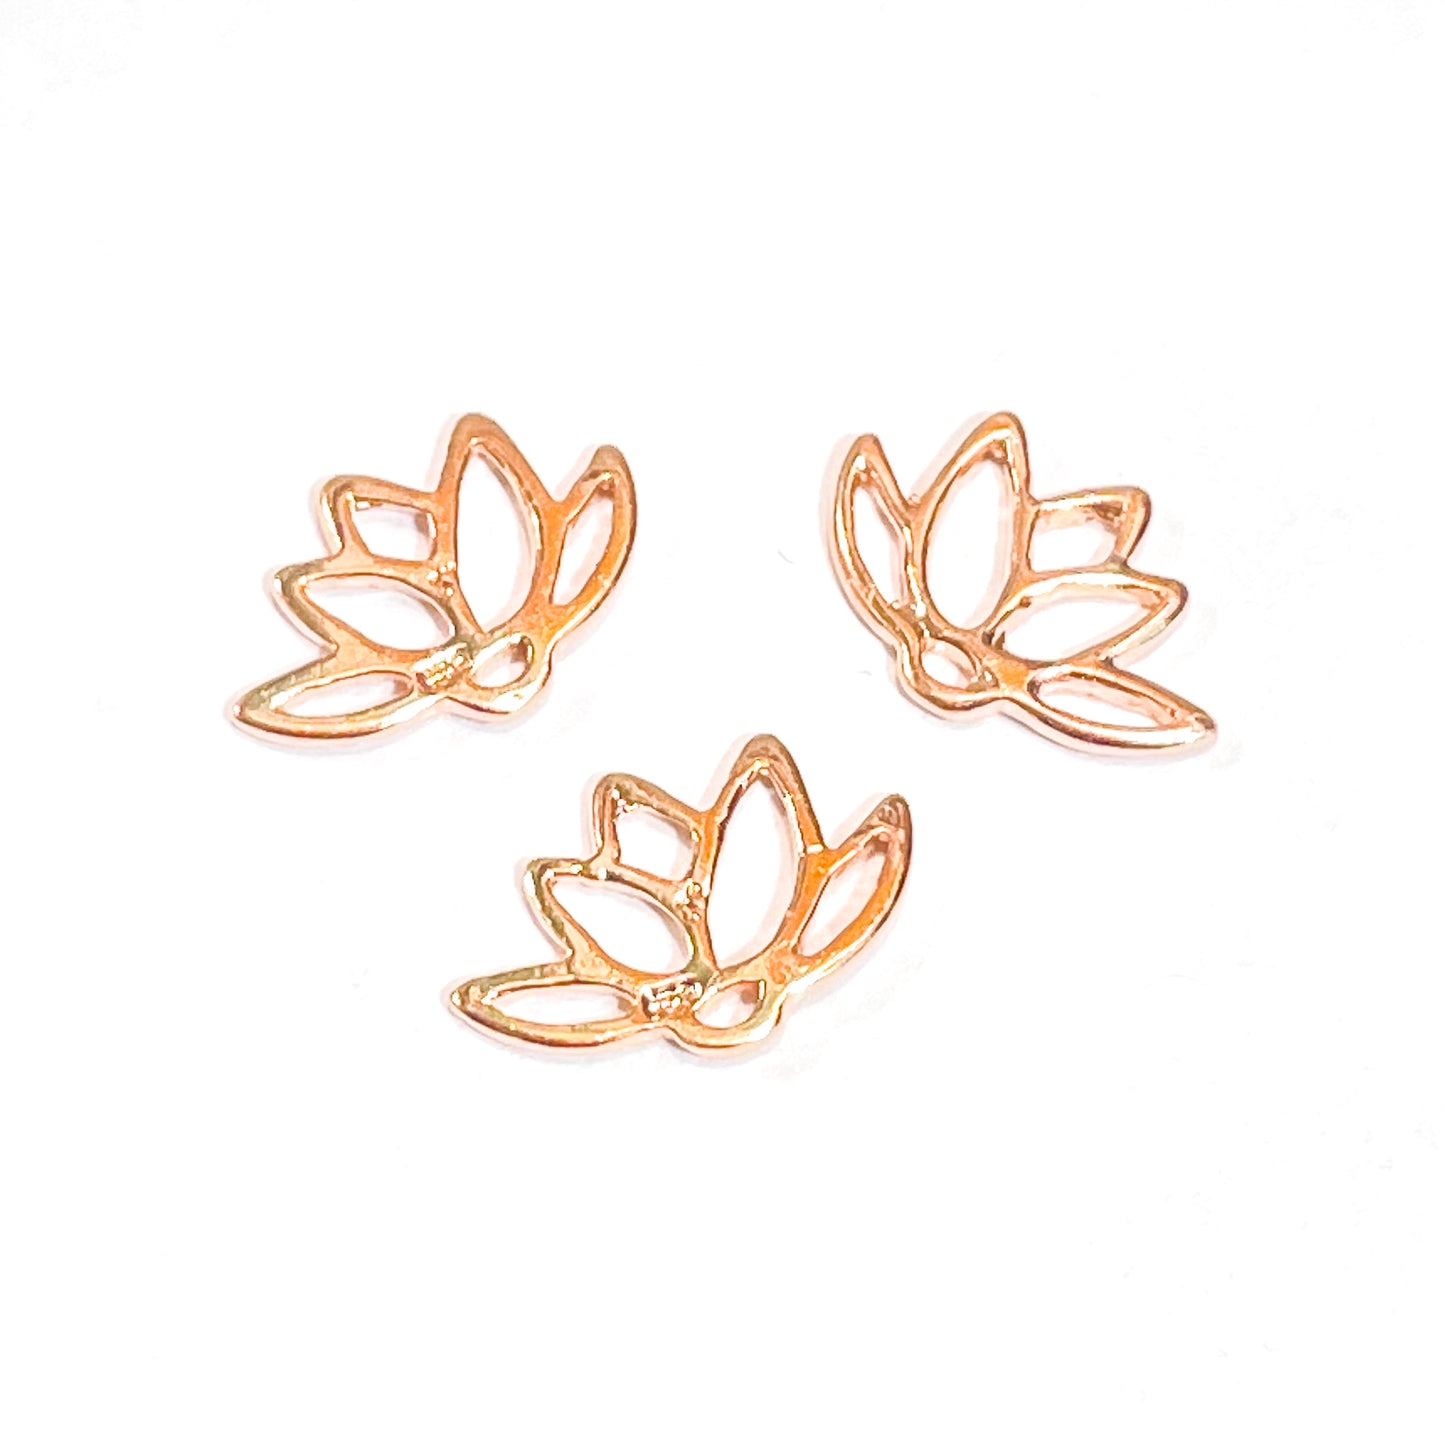 Lovely Lotus Link (3 Metal Options Available) - 1 pc.